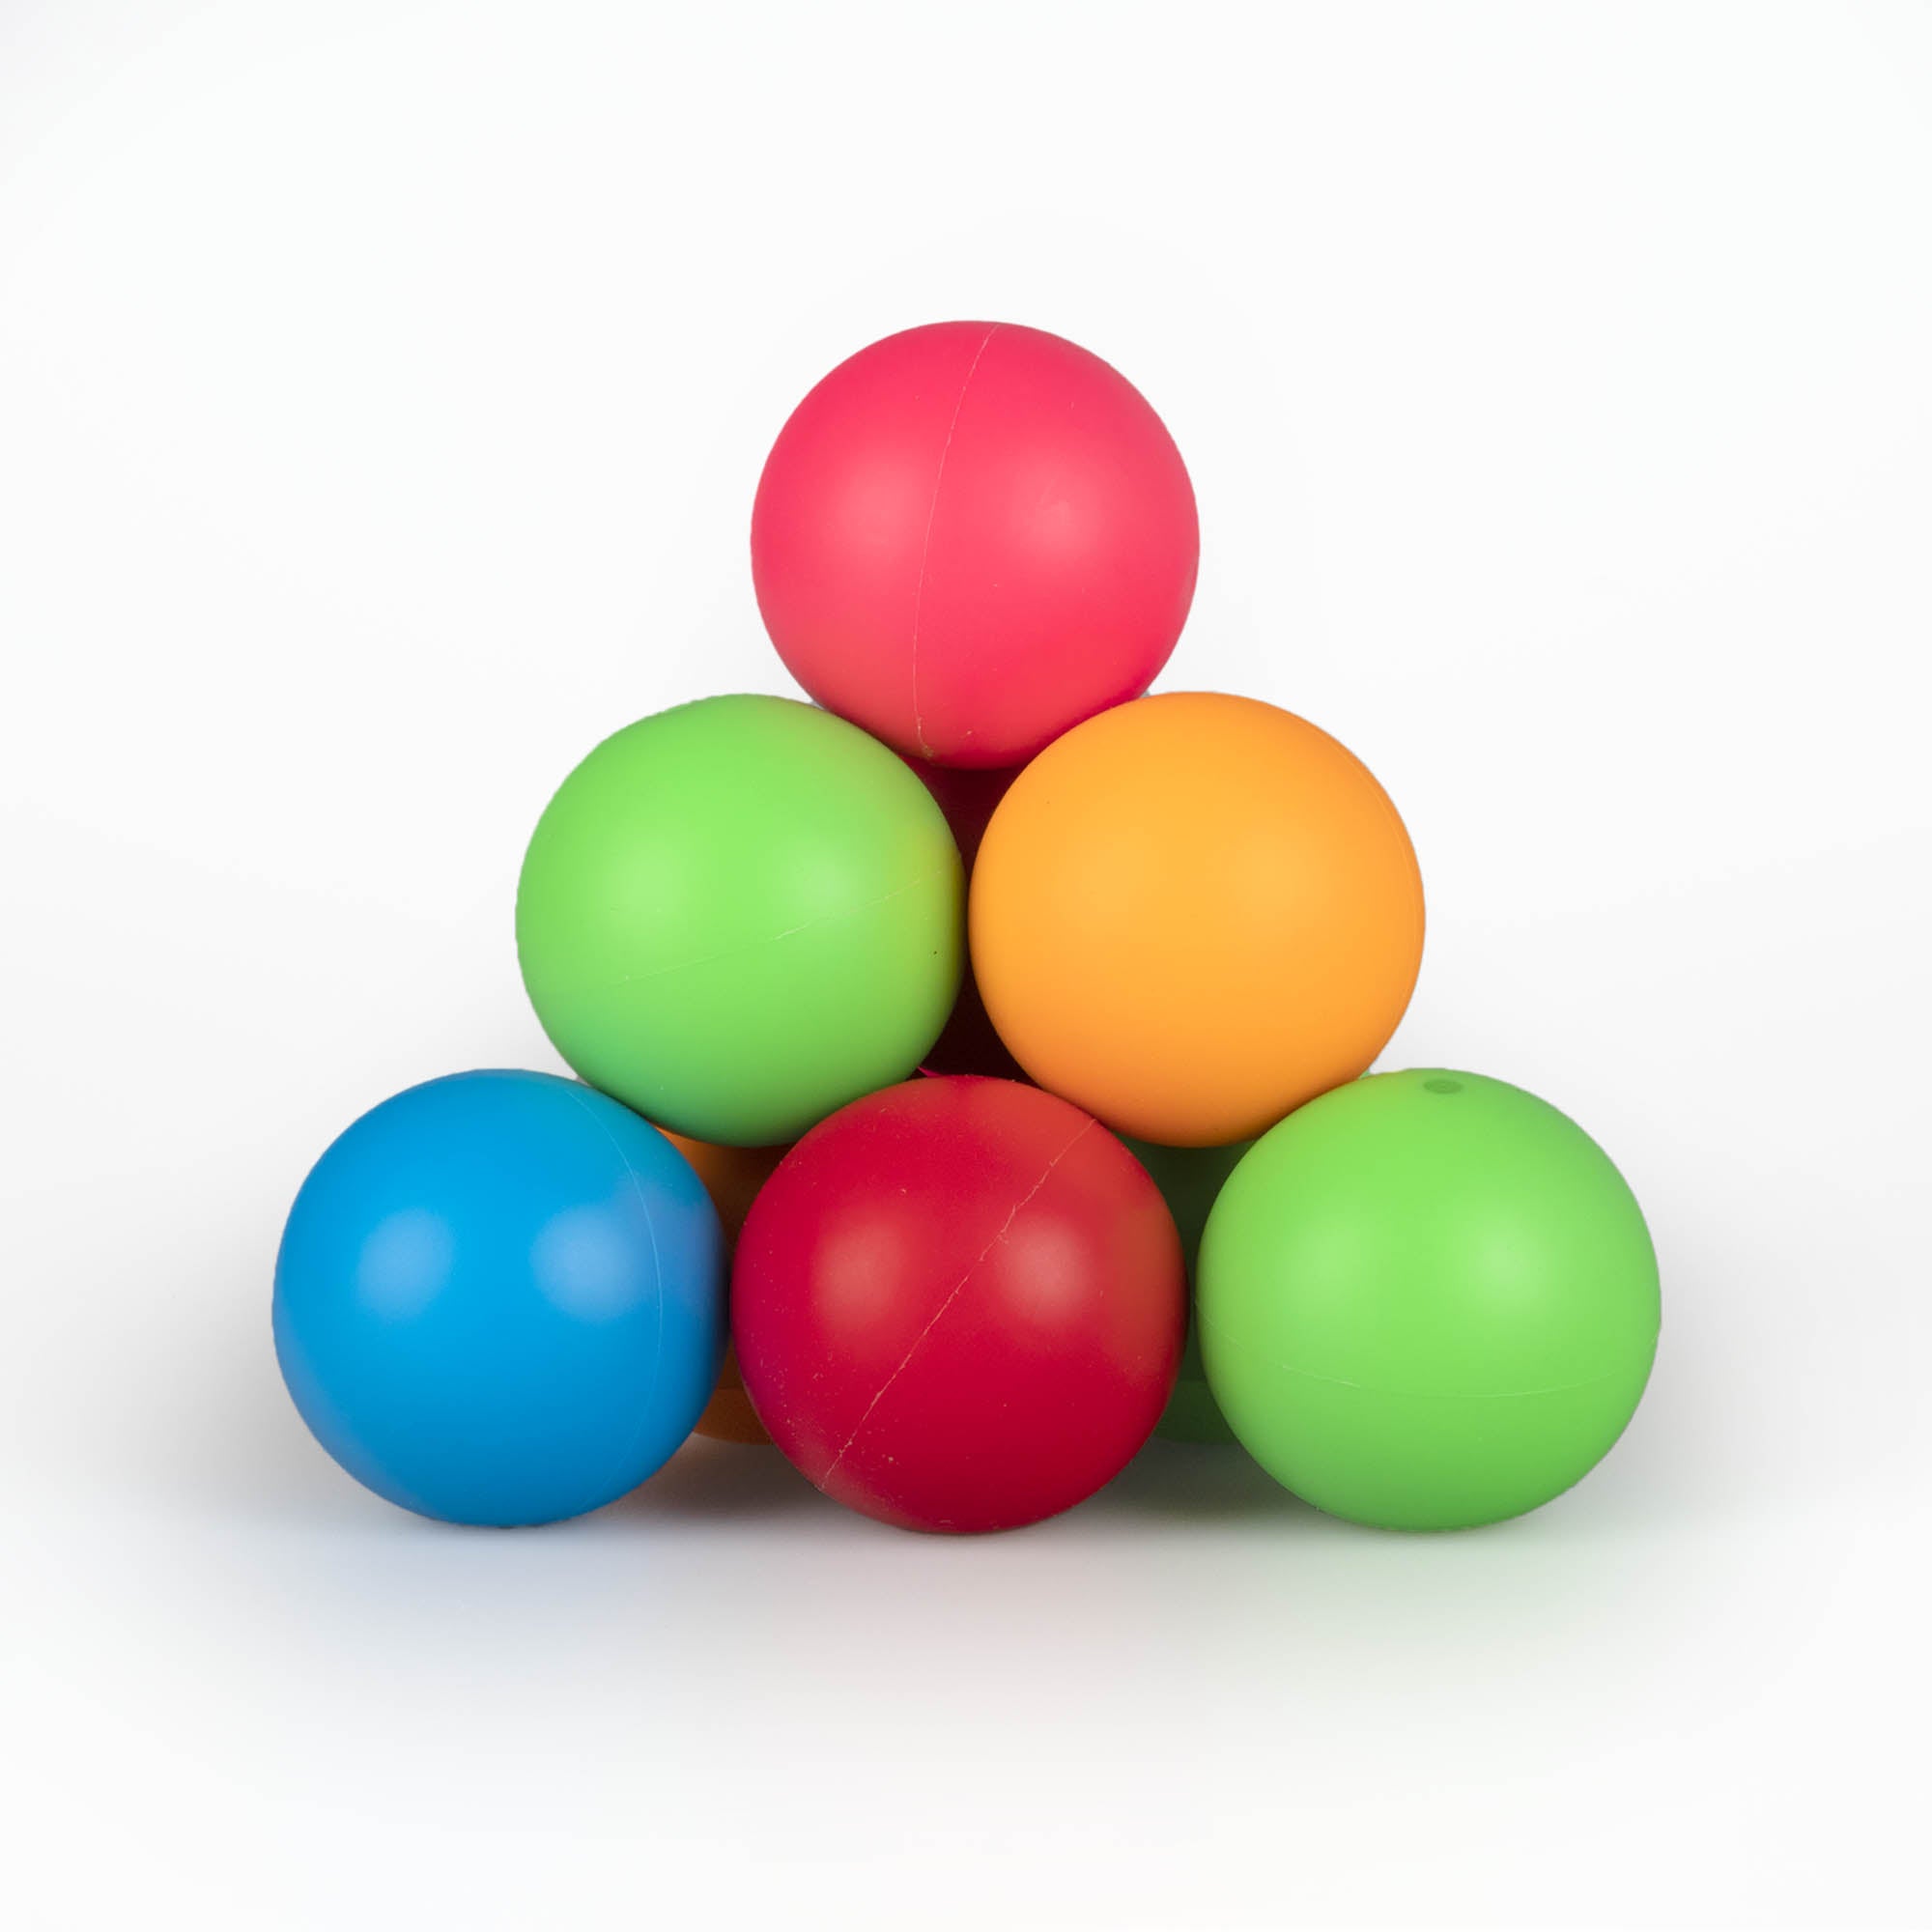 MMX 67mm juggling balls group shot stacked with all colours